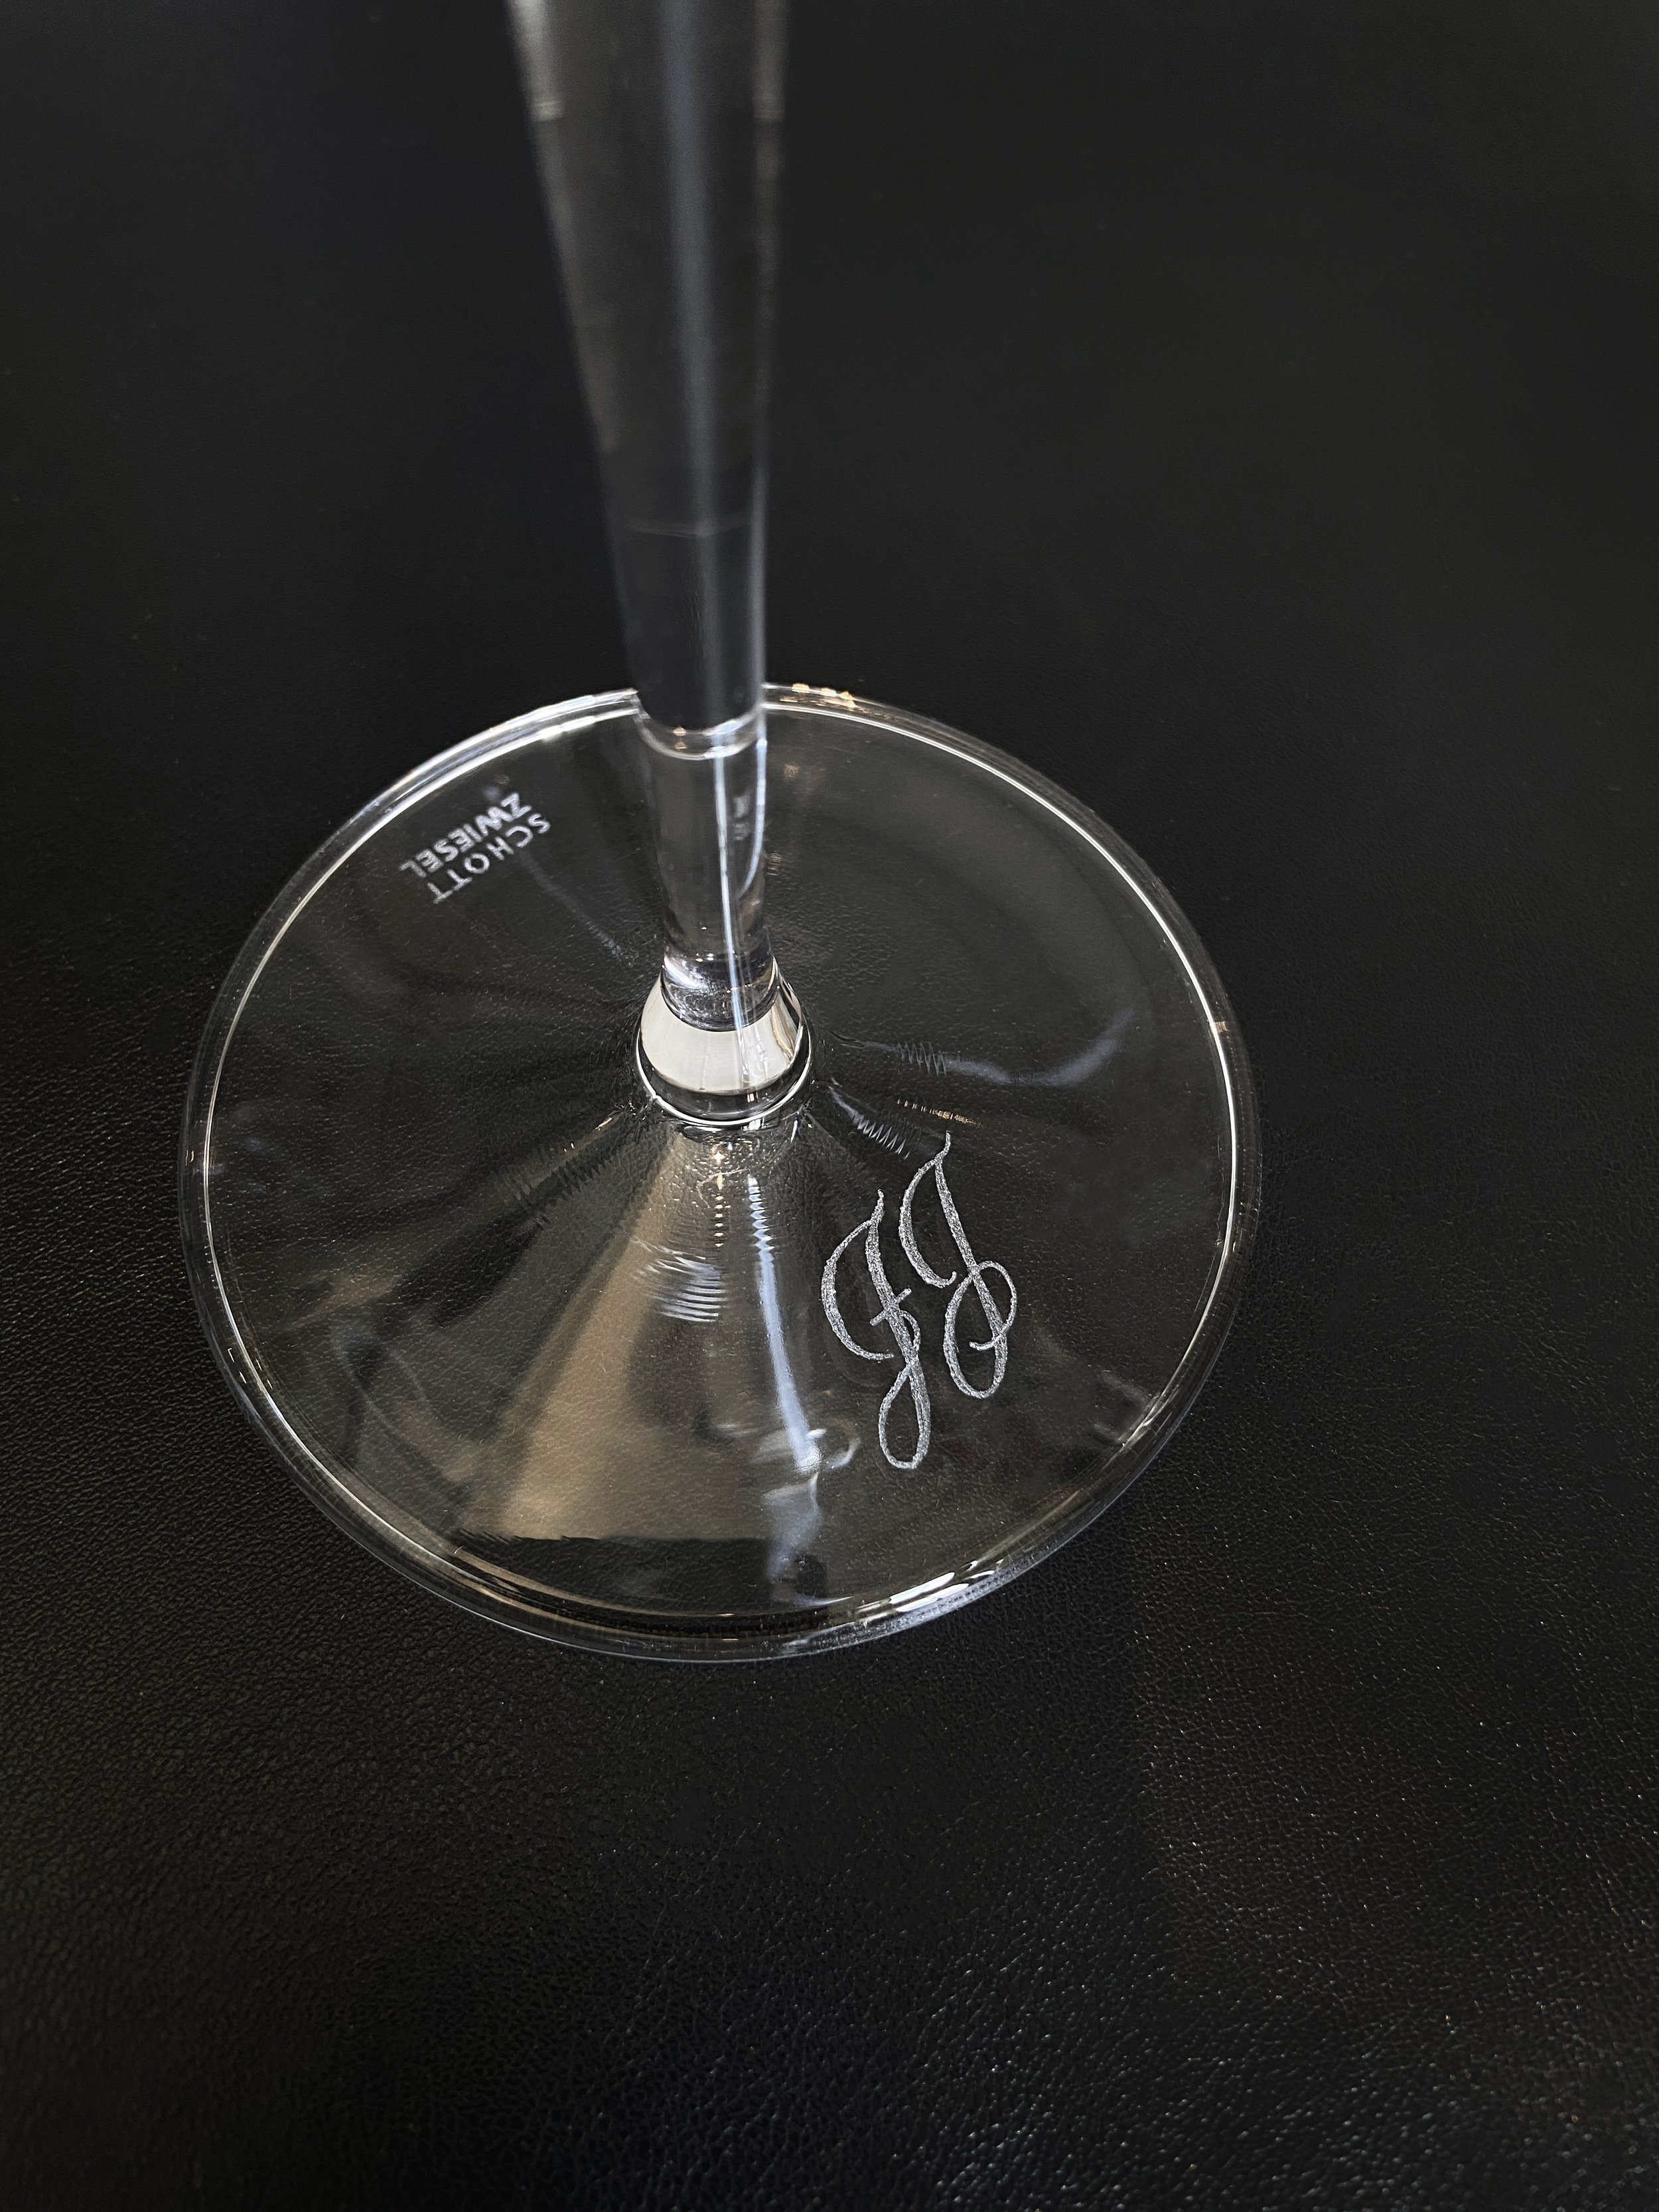 Initials Calligraphy Engraving on Schott Zwiesel Glasses